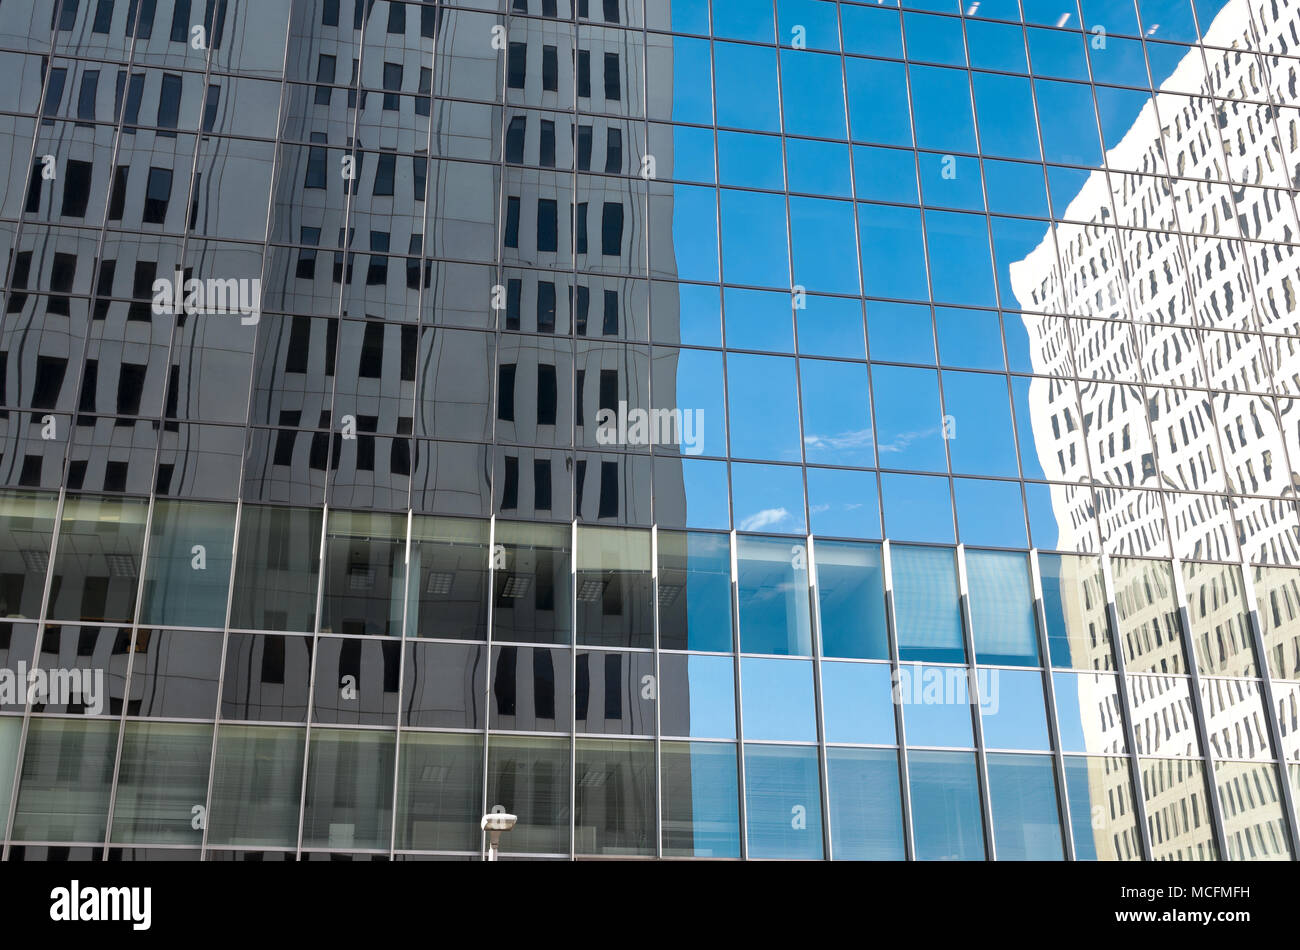 abstract of office buildings reflected on skyscraper glass in downtown minneapolis minnesota Stock Photo